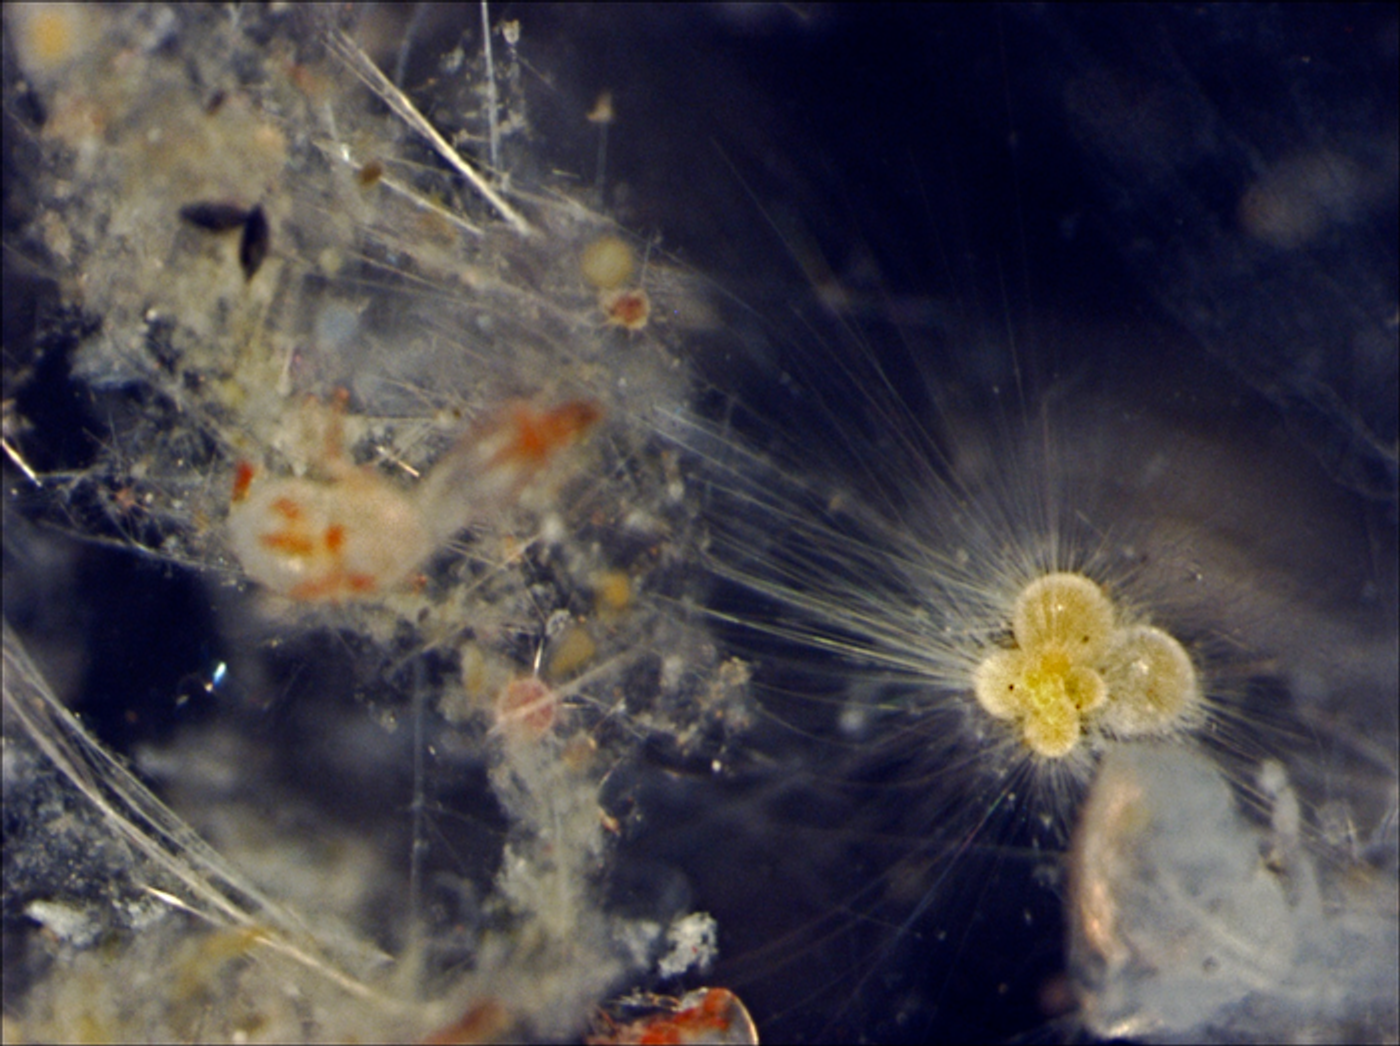 A light microscope image of a planktonic foraminifera (yellow object, bottom right) surrounded by thin strands of its cytoplasm extending into the surrounding environment. This living specimen had recently been collected from the Southwest Indian Ocean during the GLOW Cruise. (Credit: Tracy Aze, University of Leeds)